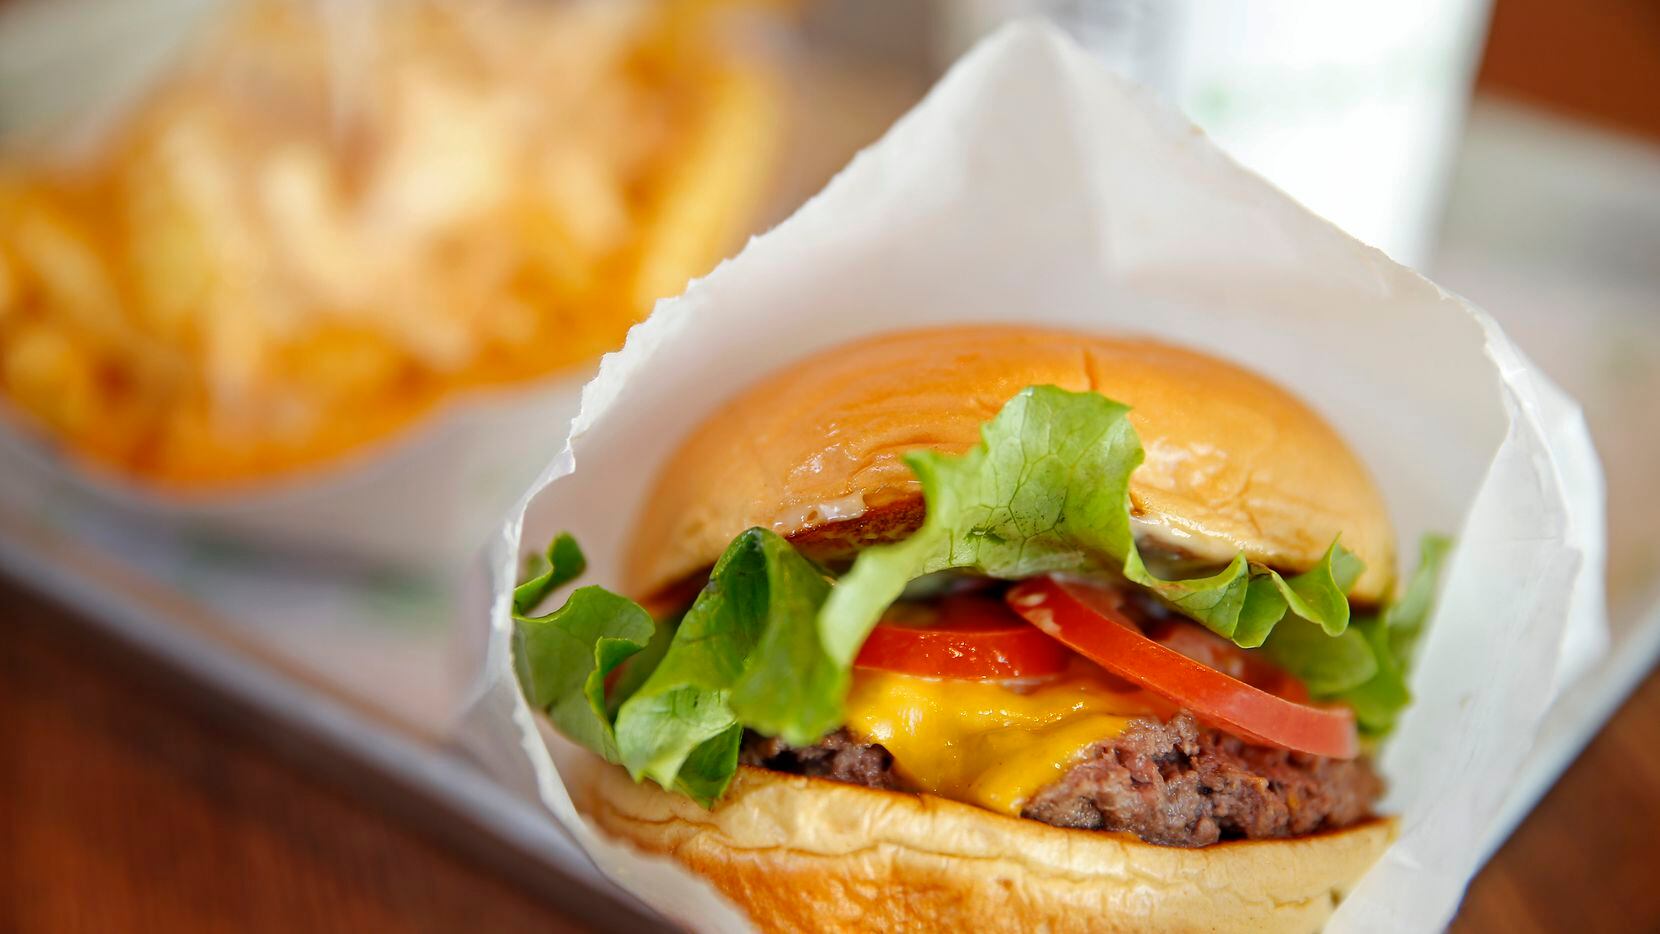 Restaurants like Shake Shack have reopened on the north side of Royal Lane after a tornadoes closed some businesses for several weeks in October and November 2019.